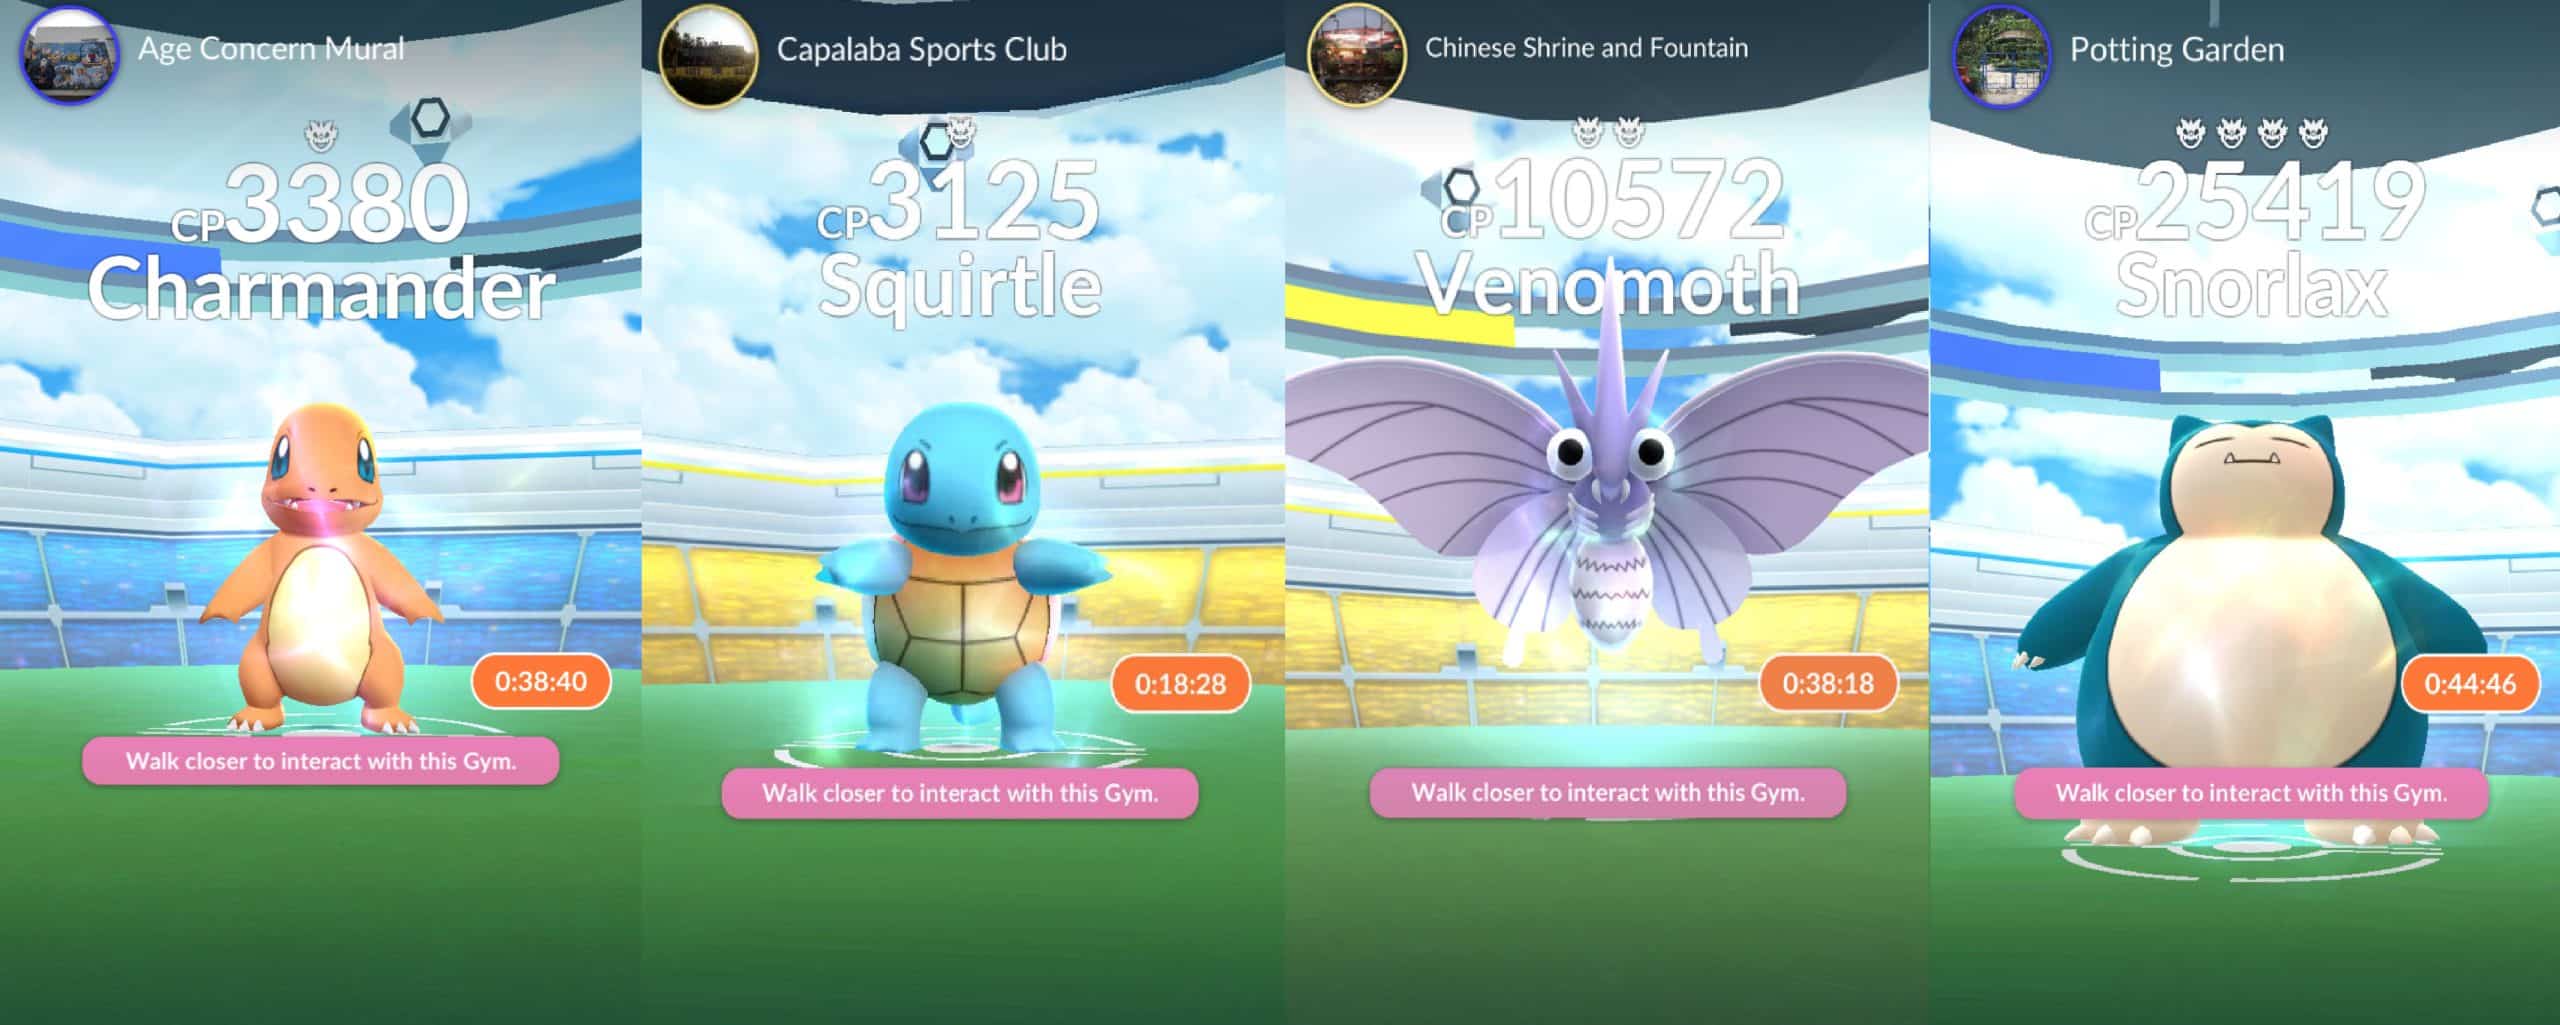 Kanto Region Raid Bosses Appearing in Pokemon Go for a Limited